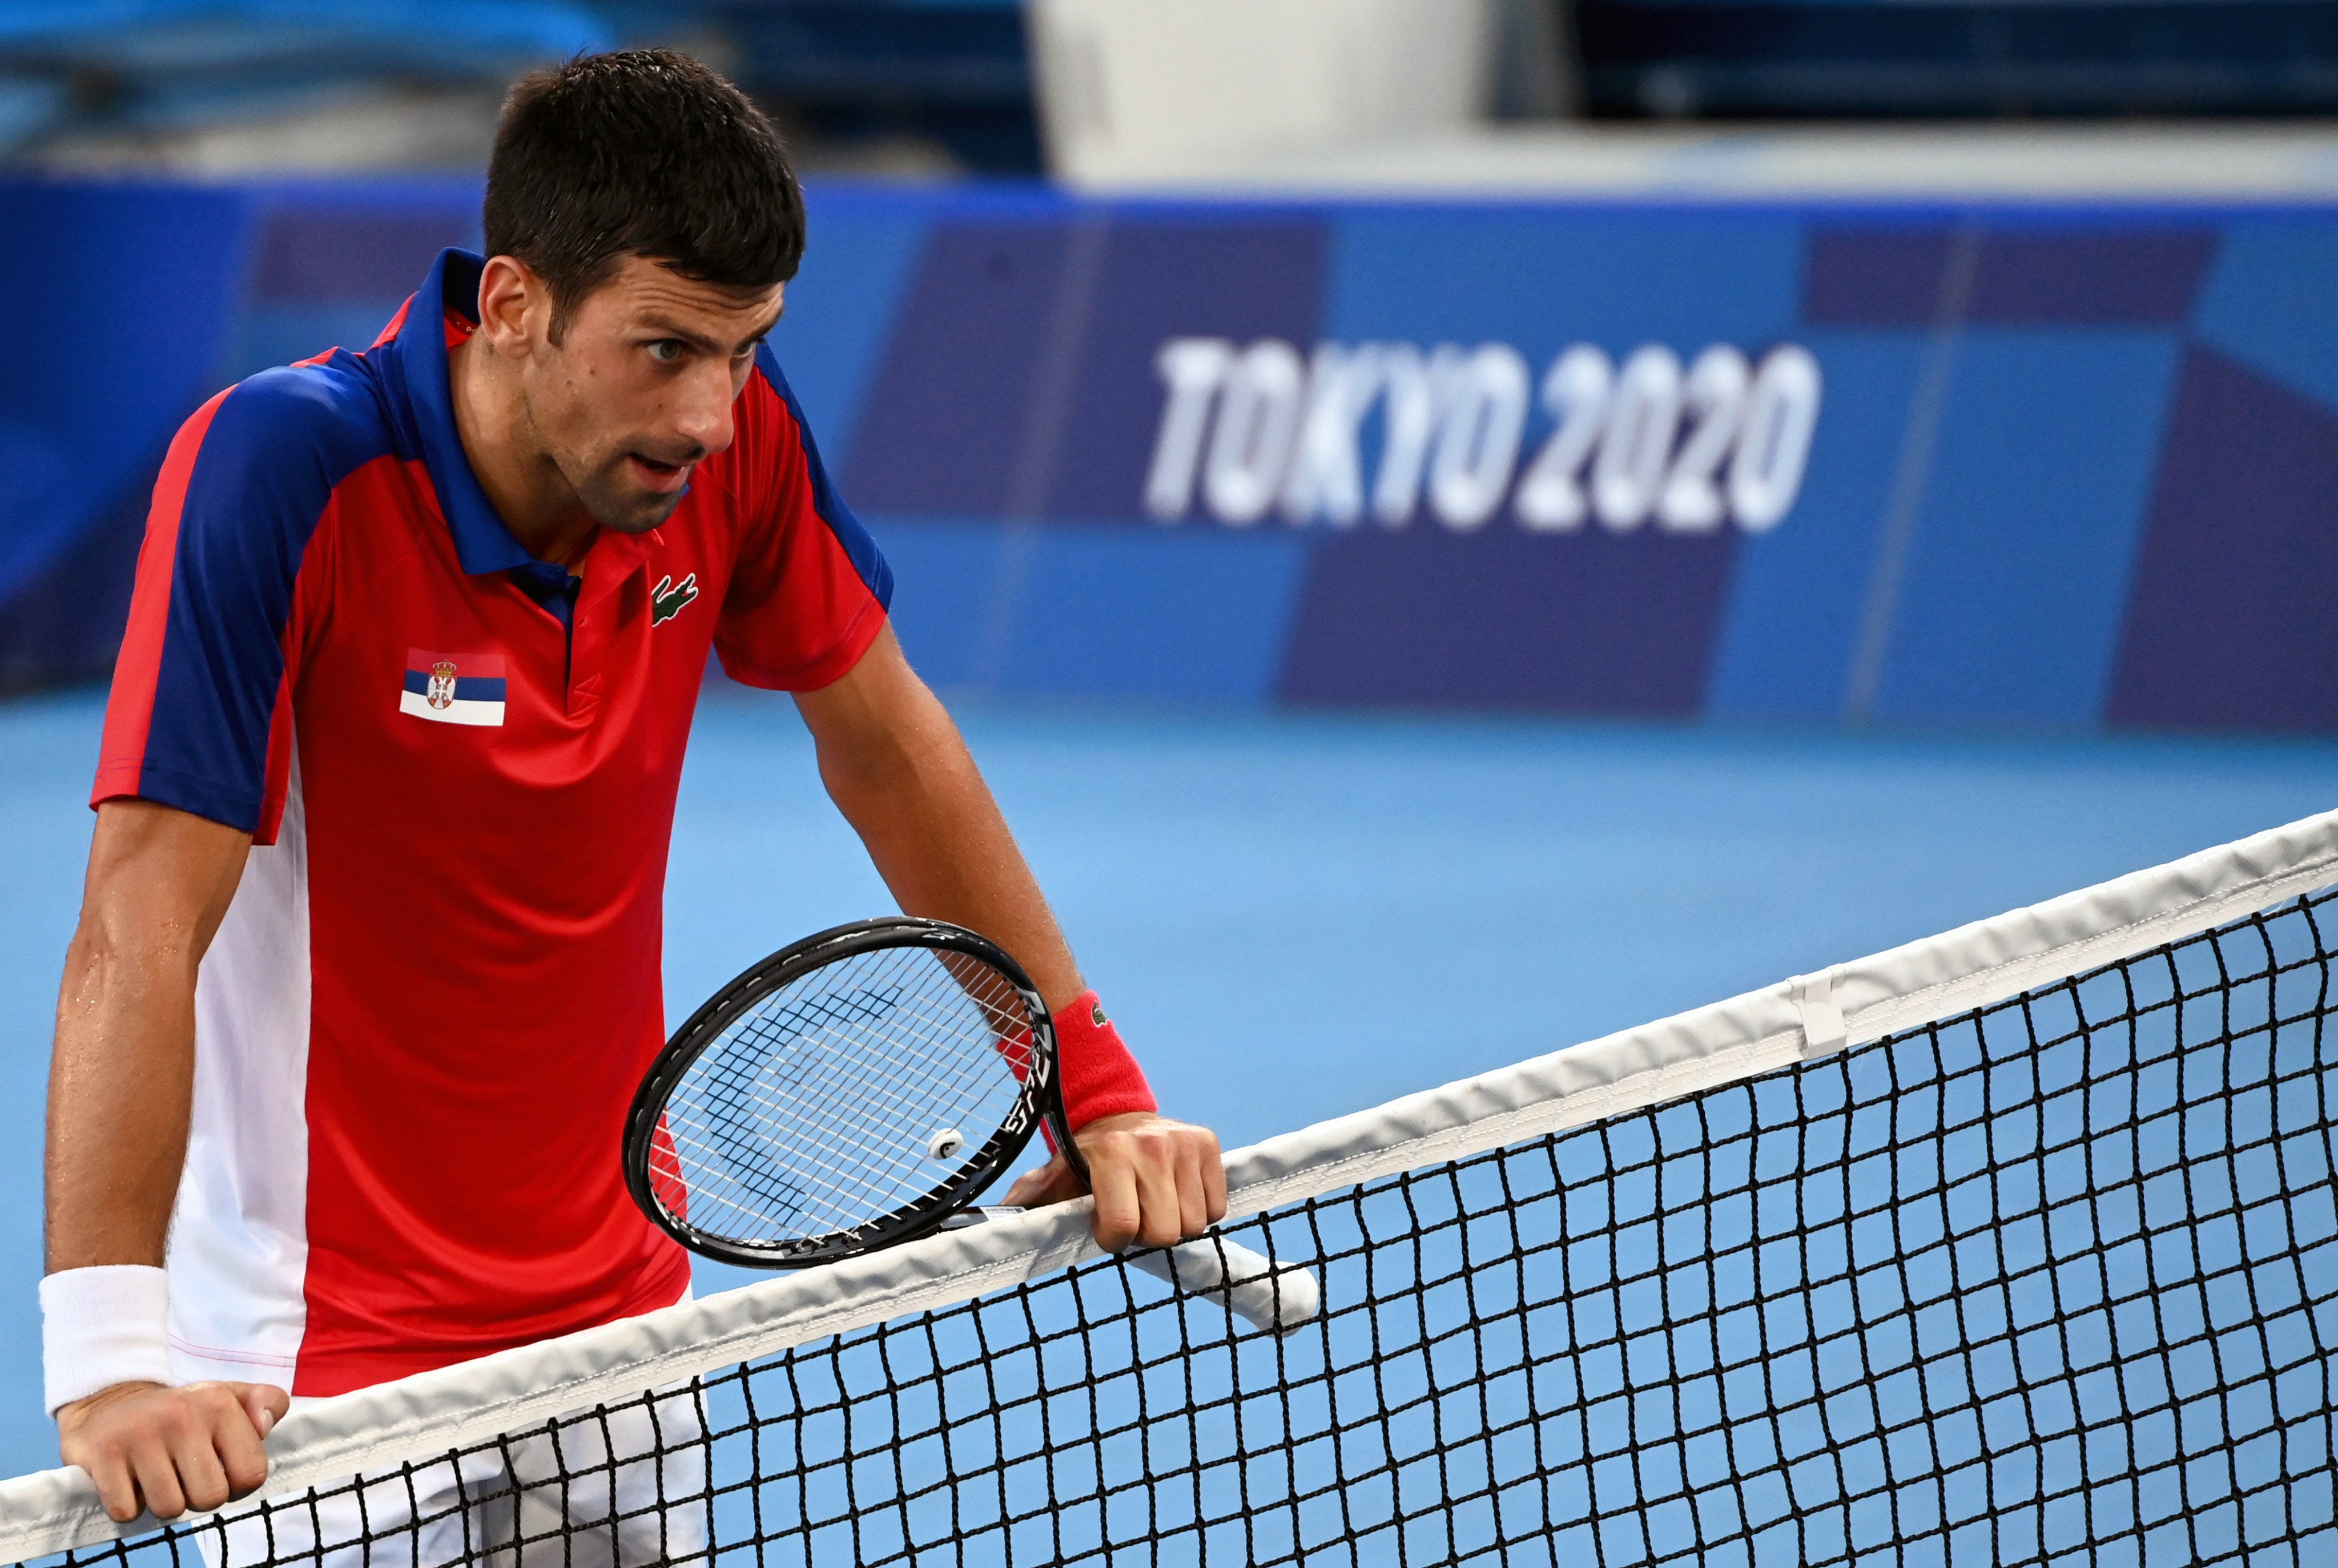 Novak Djokovic has previously said he is prepared to miss tournaments over his Covid-19 stance. Photo: DPA